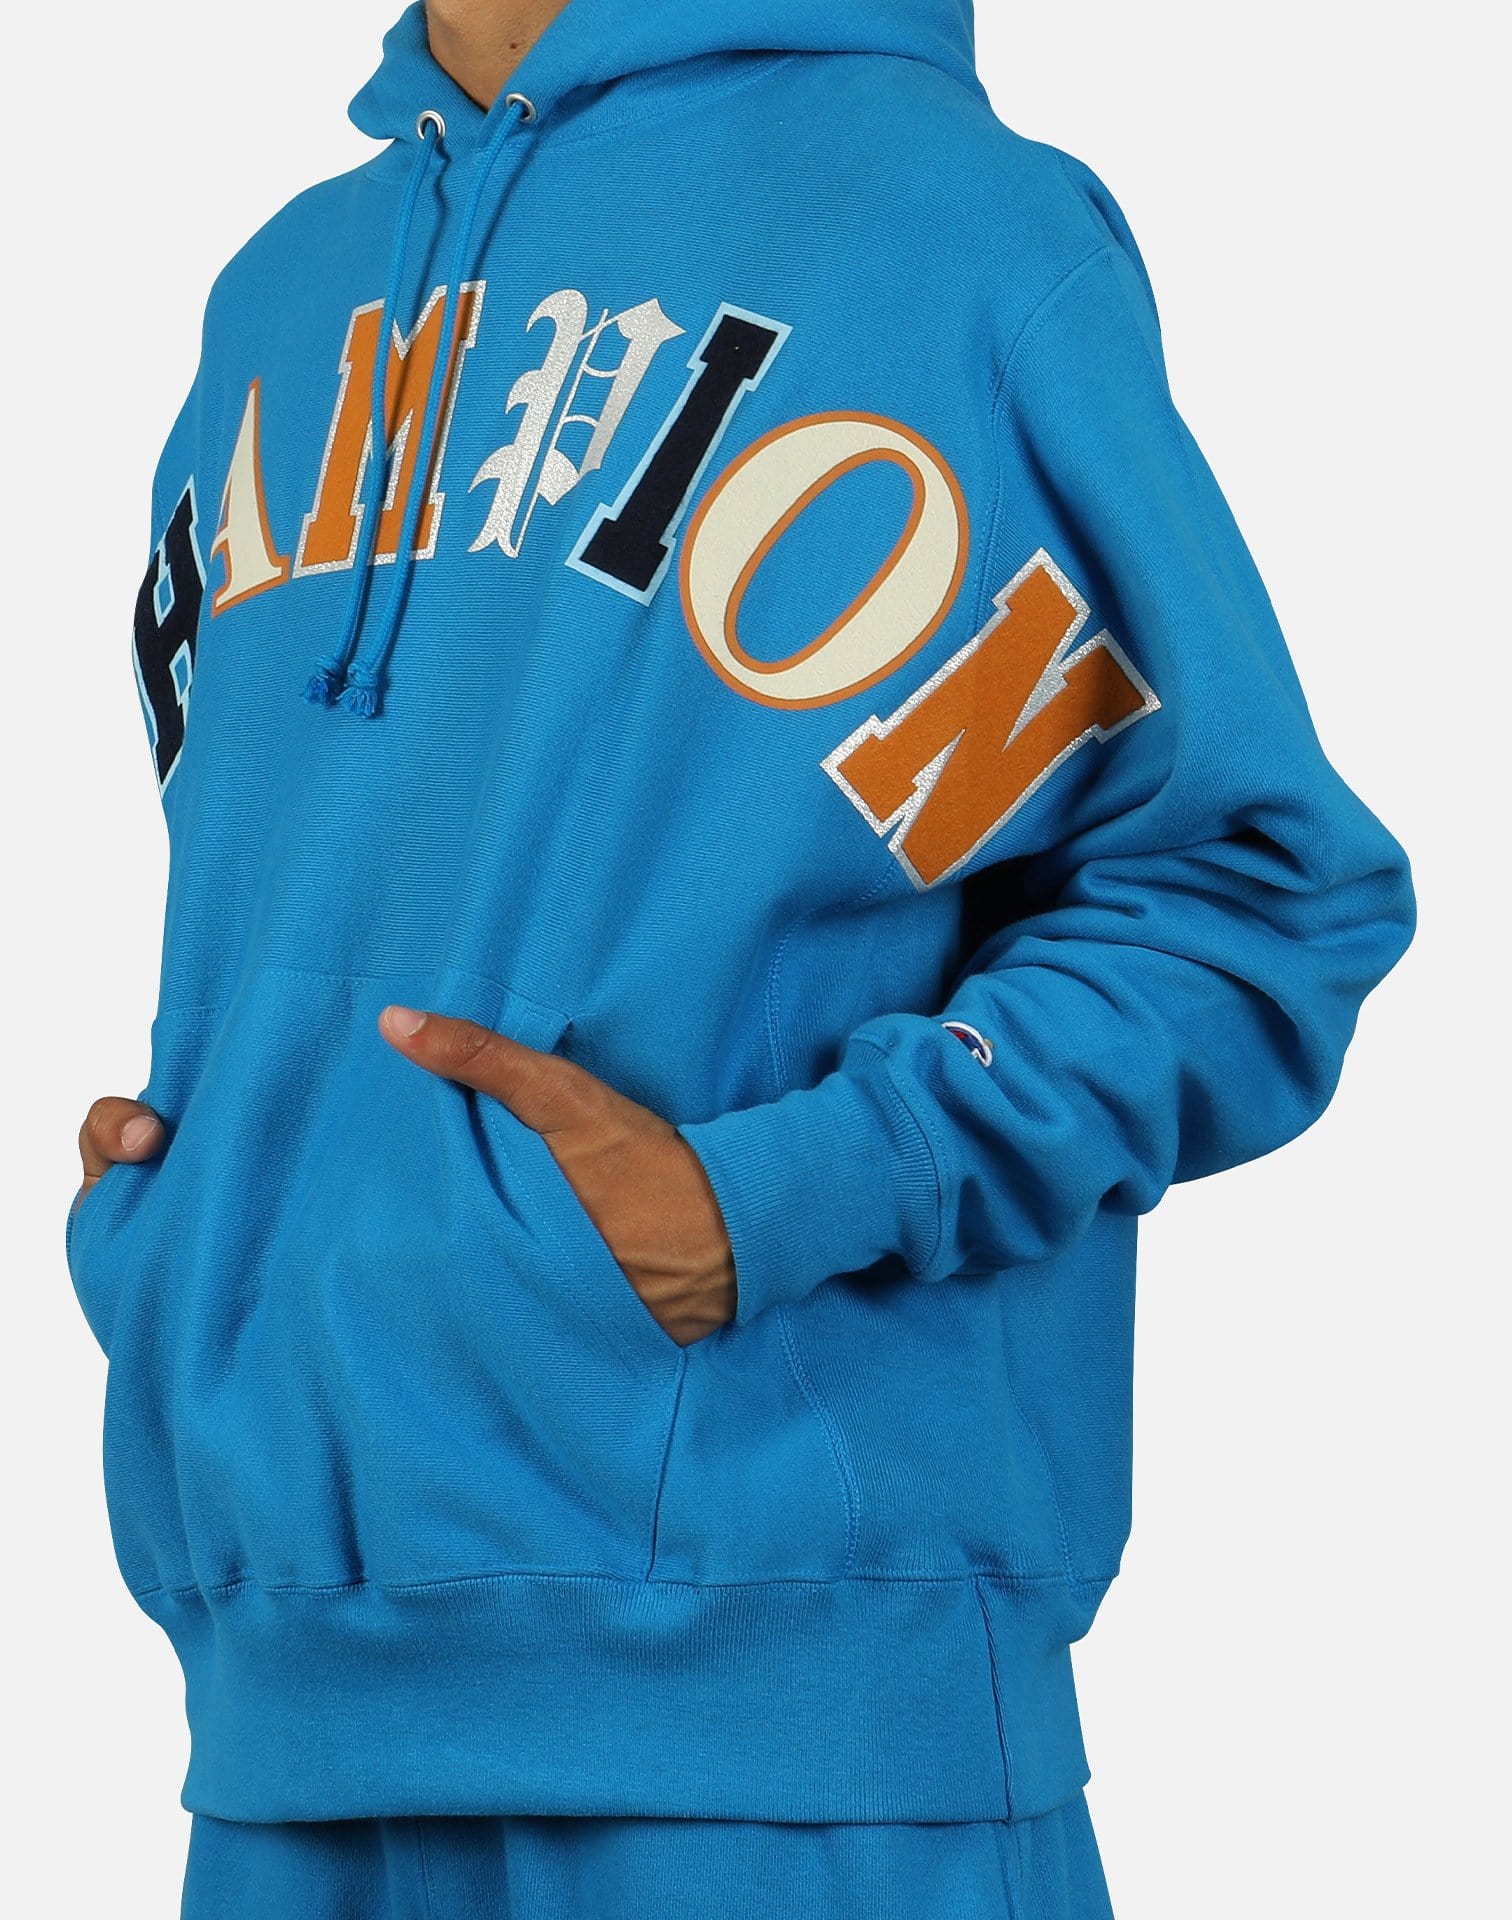 champion pullover hoodie blue